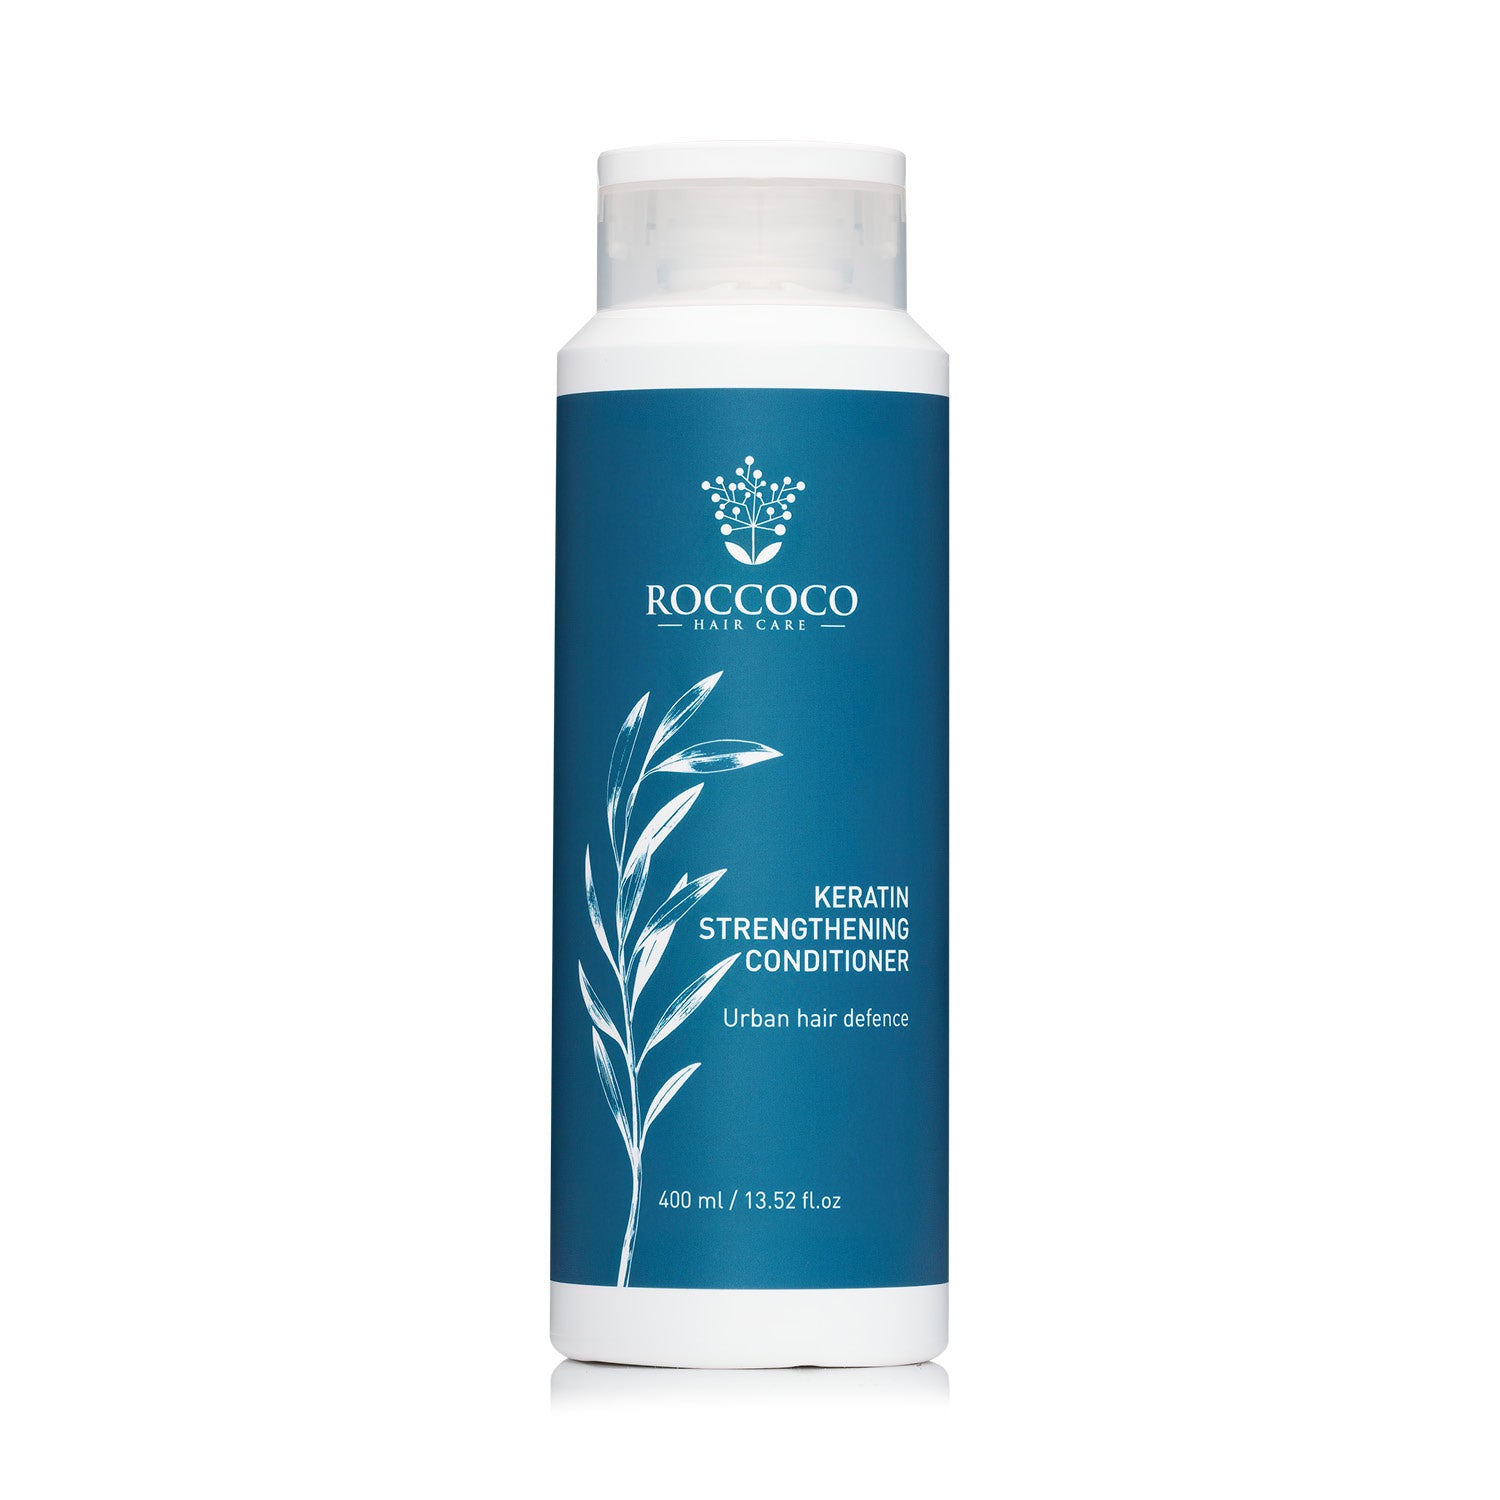 Roccoco Botanicals Keratin Strengthening Conditioner - Click to Buy!